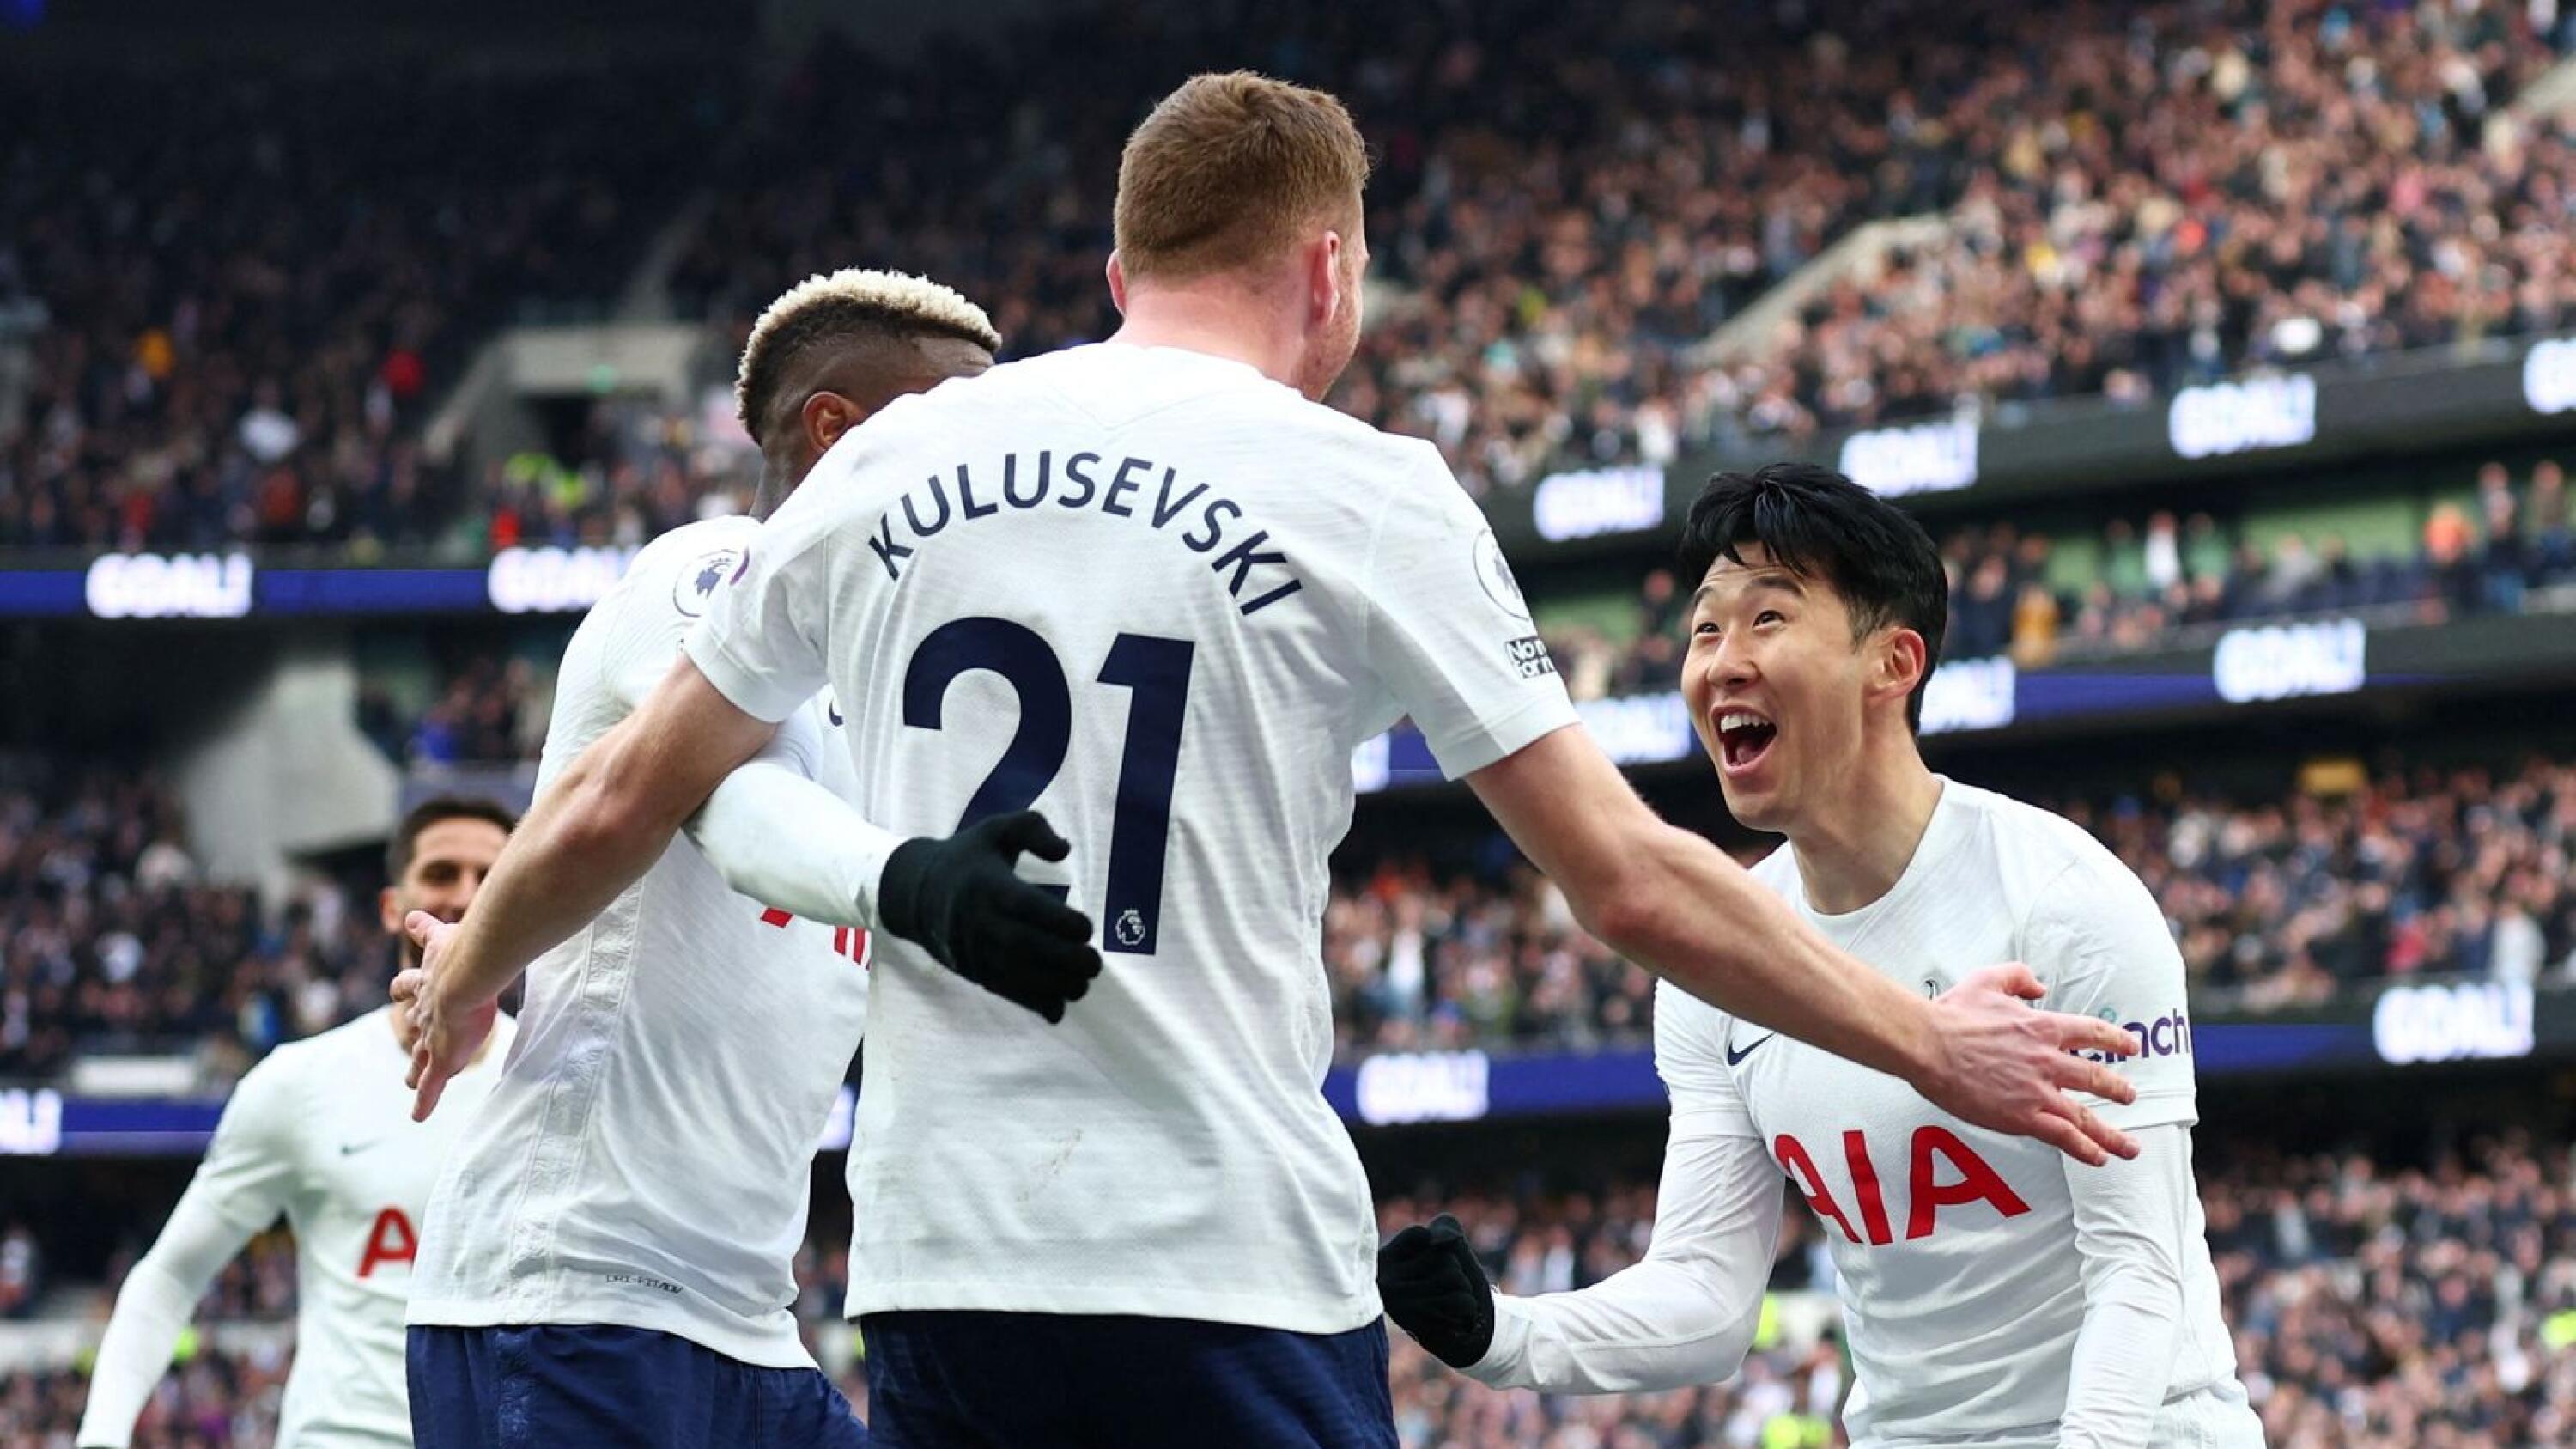 Tottenham Hotspur's Son Heung-min celebrates with teammates after scoring their third goal during their Premier League game against Newcastle United at the Tottenham Hotspur Stadium in London on Saturday